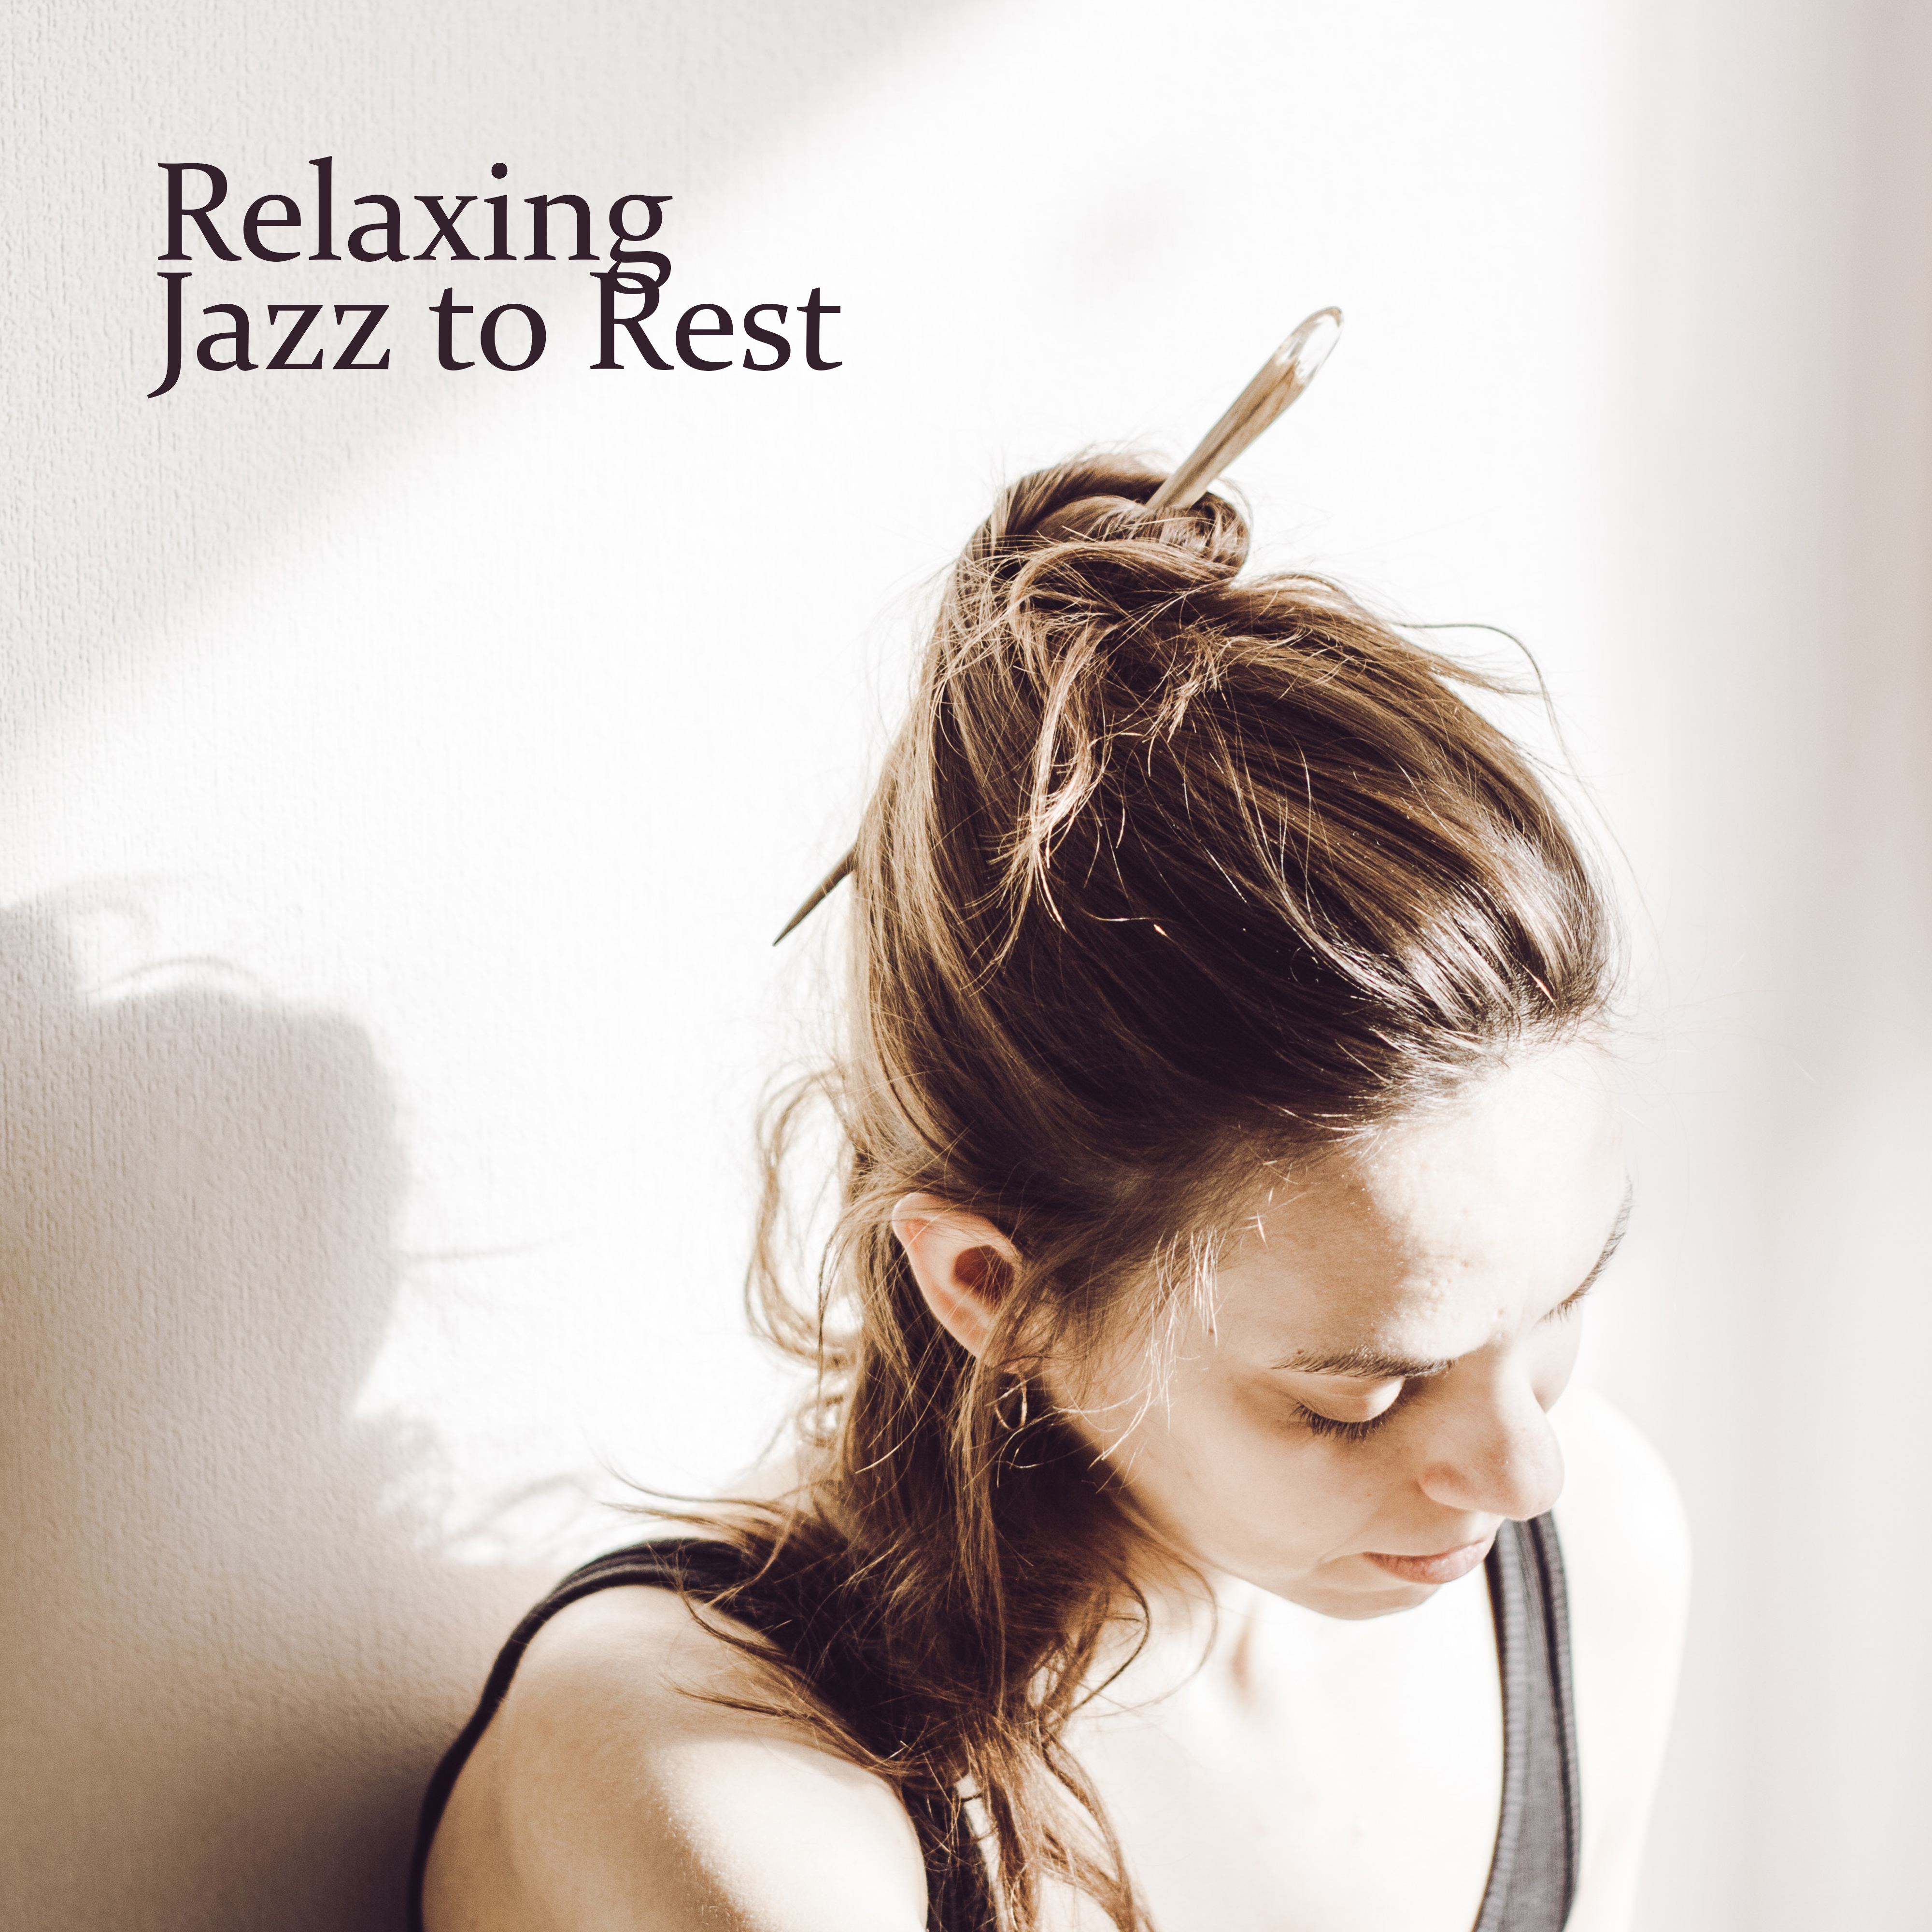 Relaxing Jazz to Rest